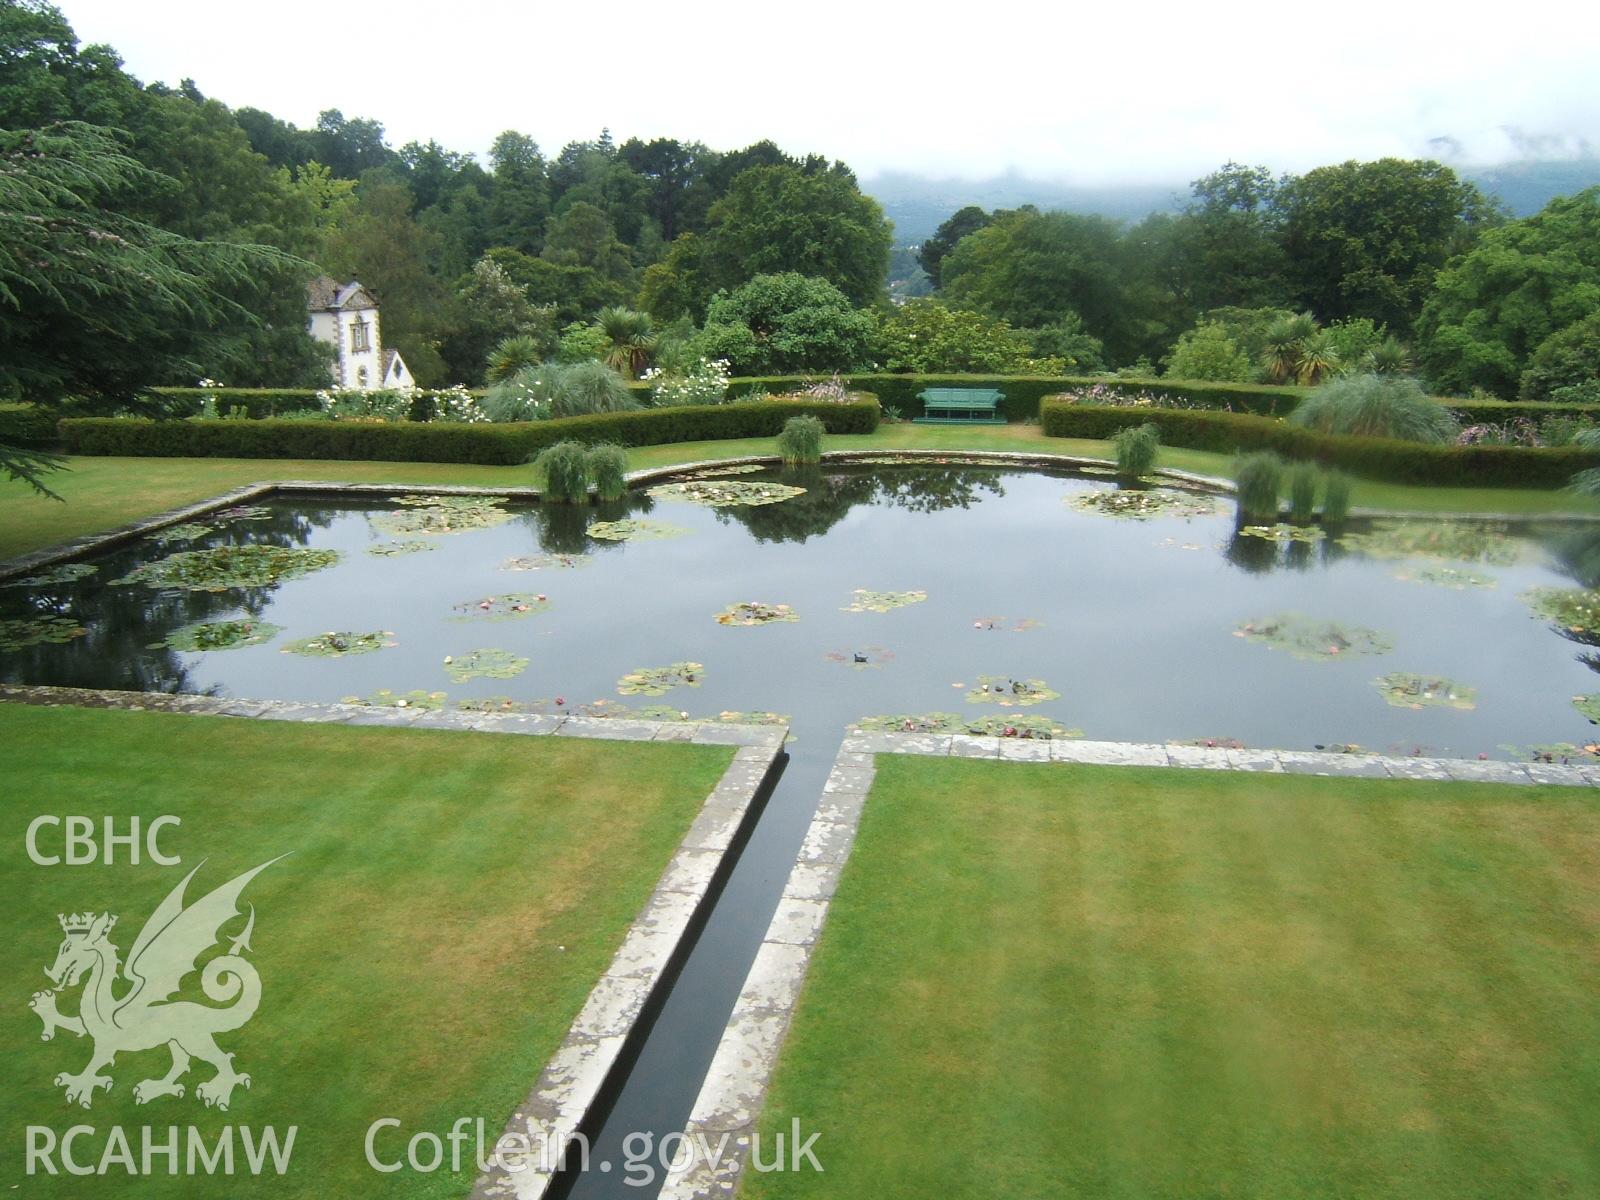 Rill, Lily Pond, Pin Mill and mountains beyond.